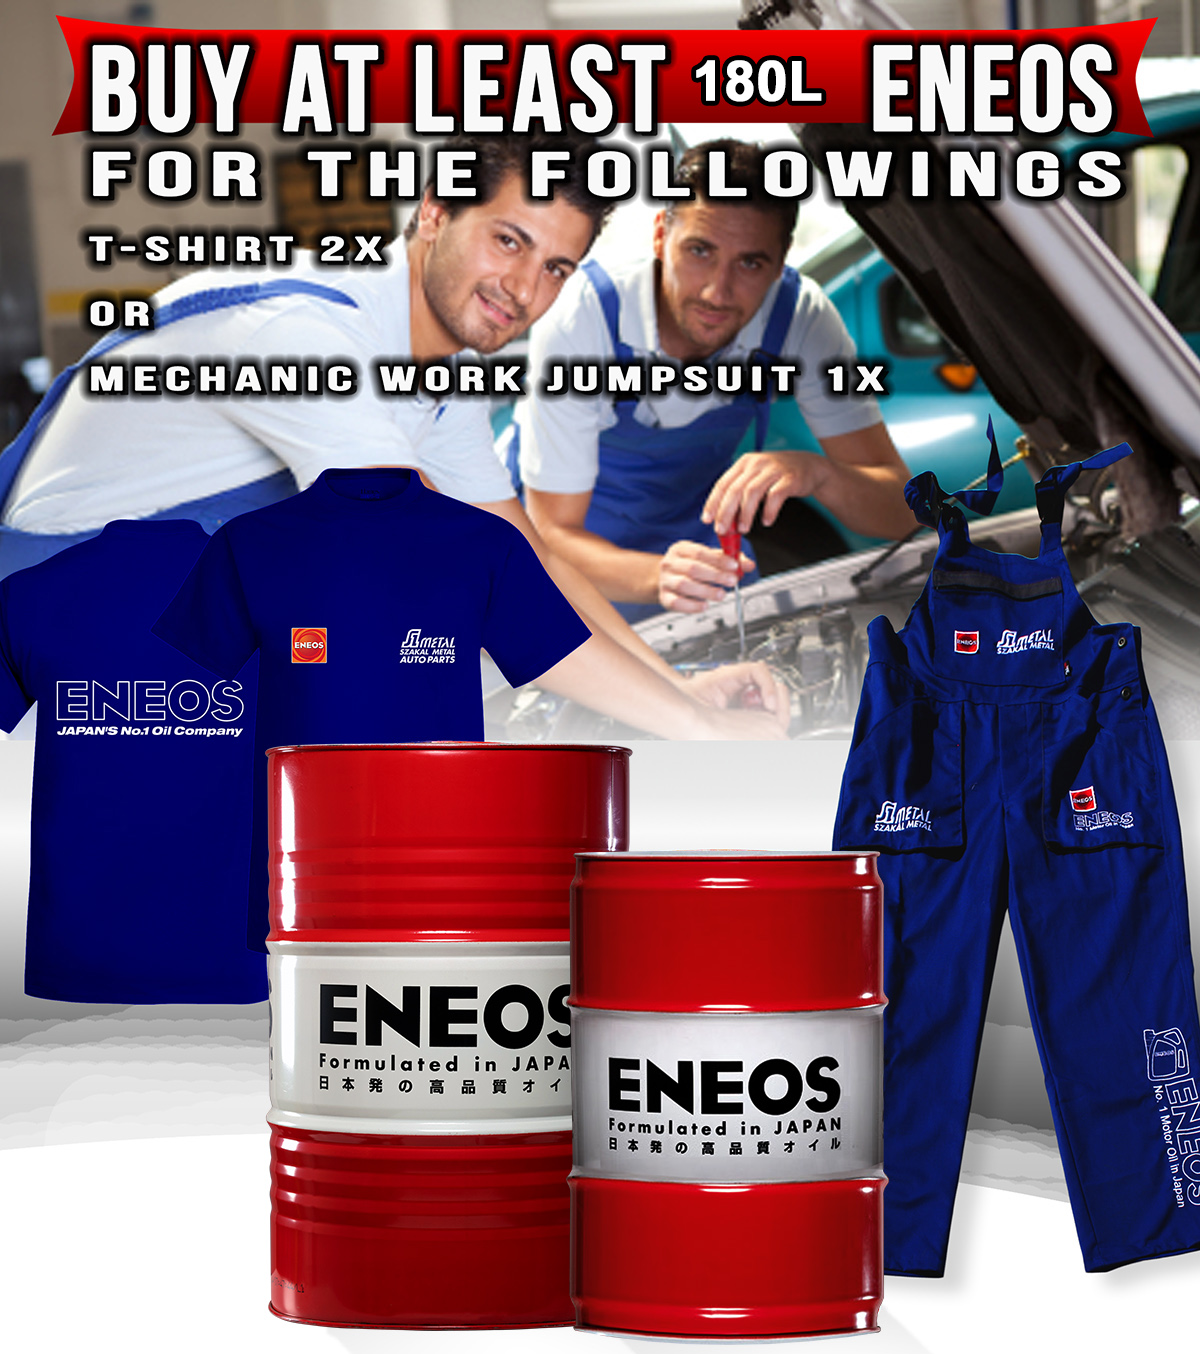 ENEOS Sales:  gift T-shirts or Jumpsuit